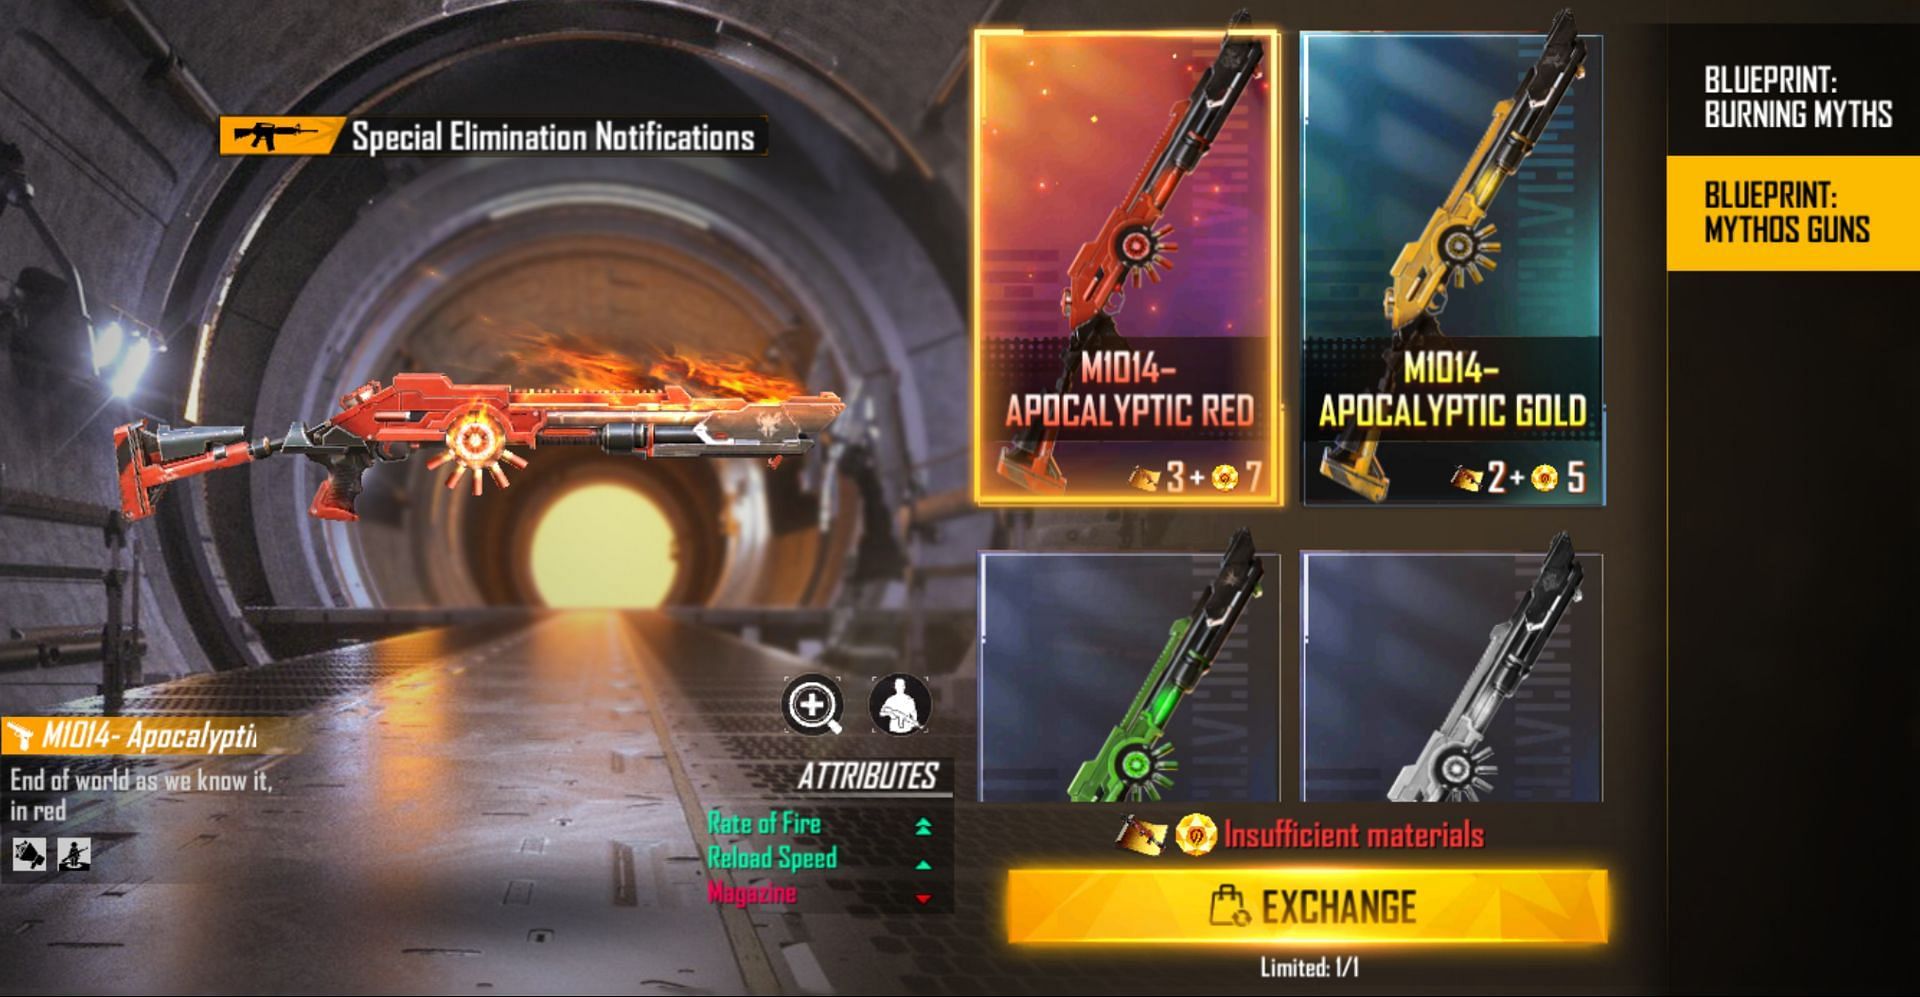 Earlier this week, users had the option to obtain several legendary weapon skins (Image via Garena)